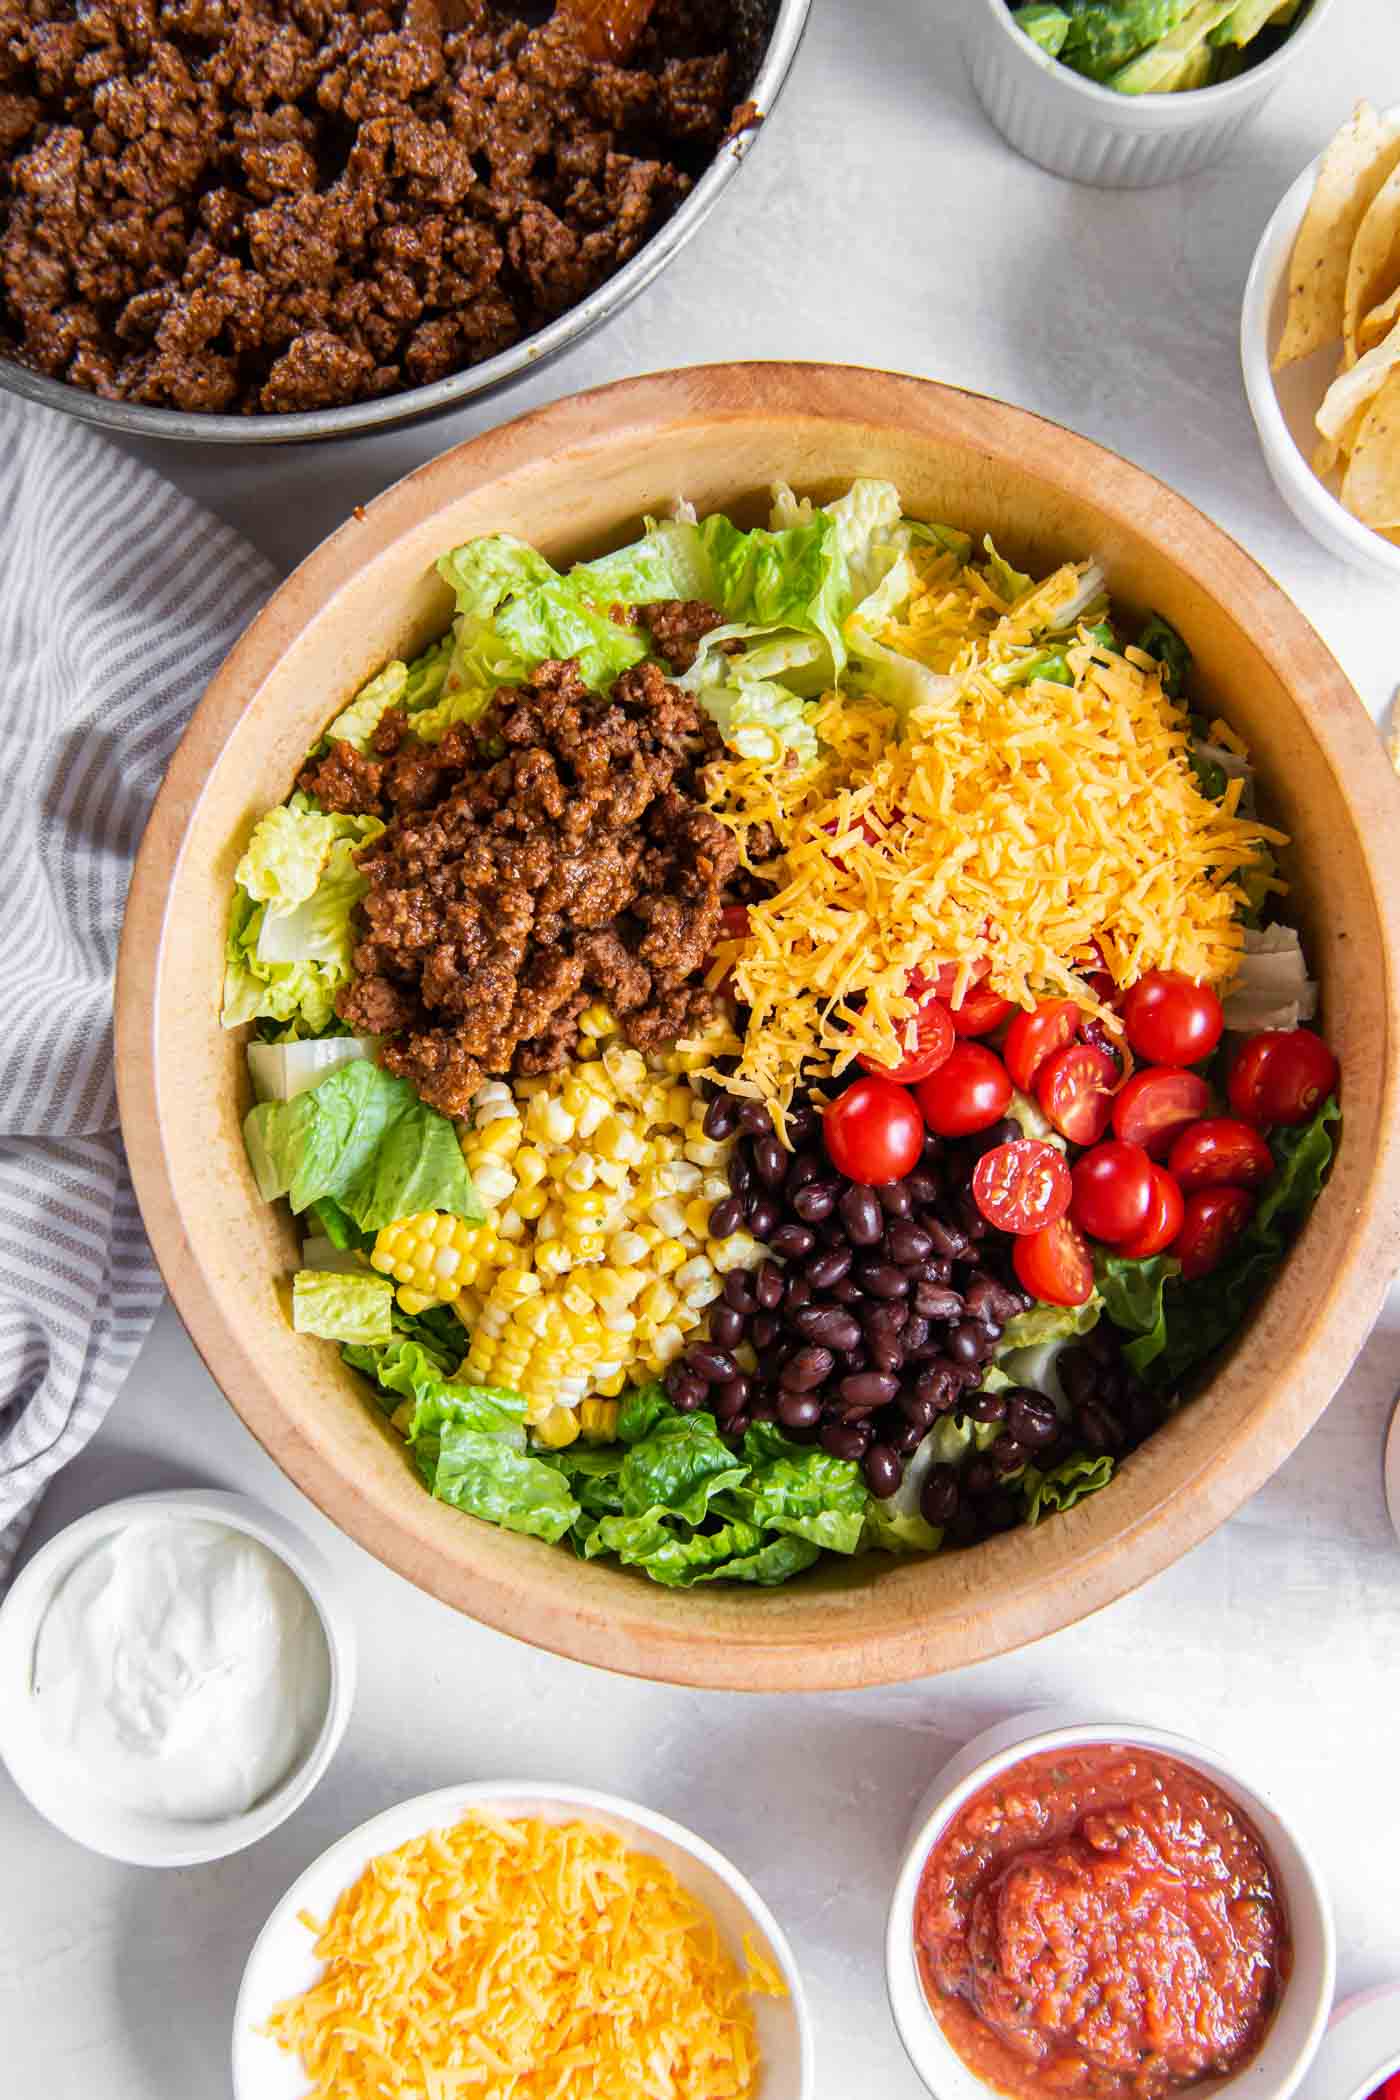 Taco salad ingredients added to a wooden serving bowl.